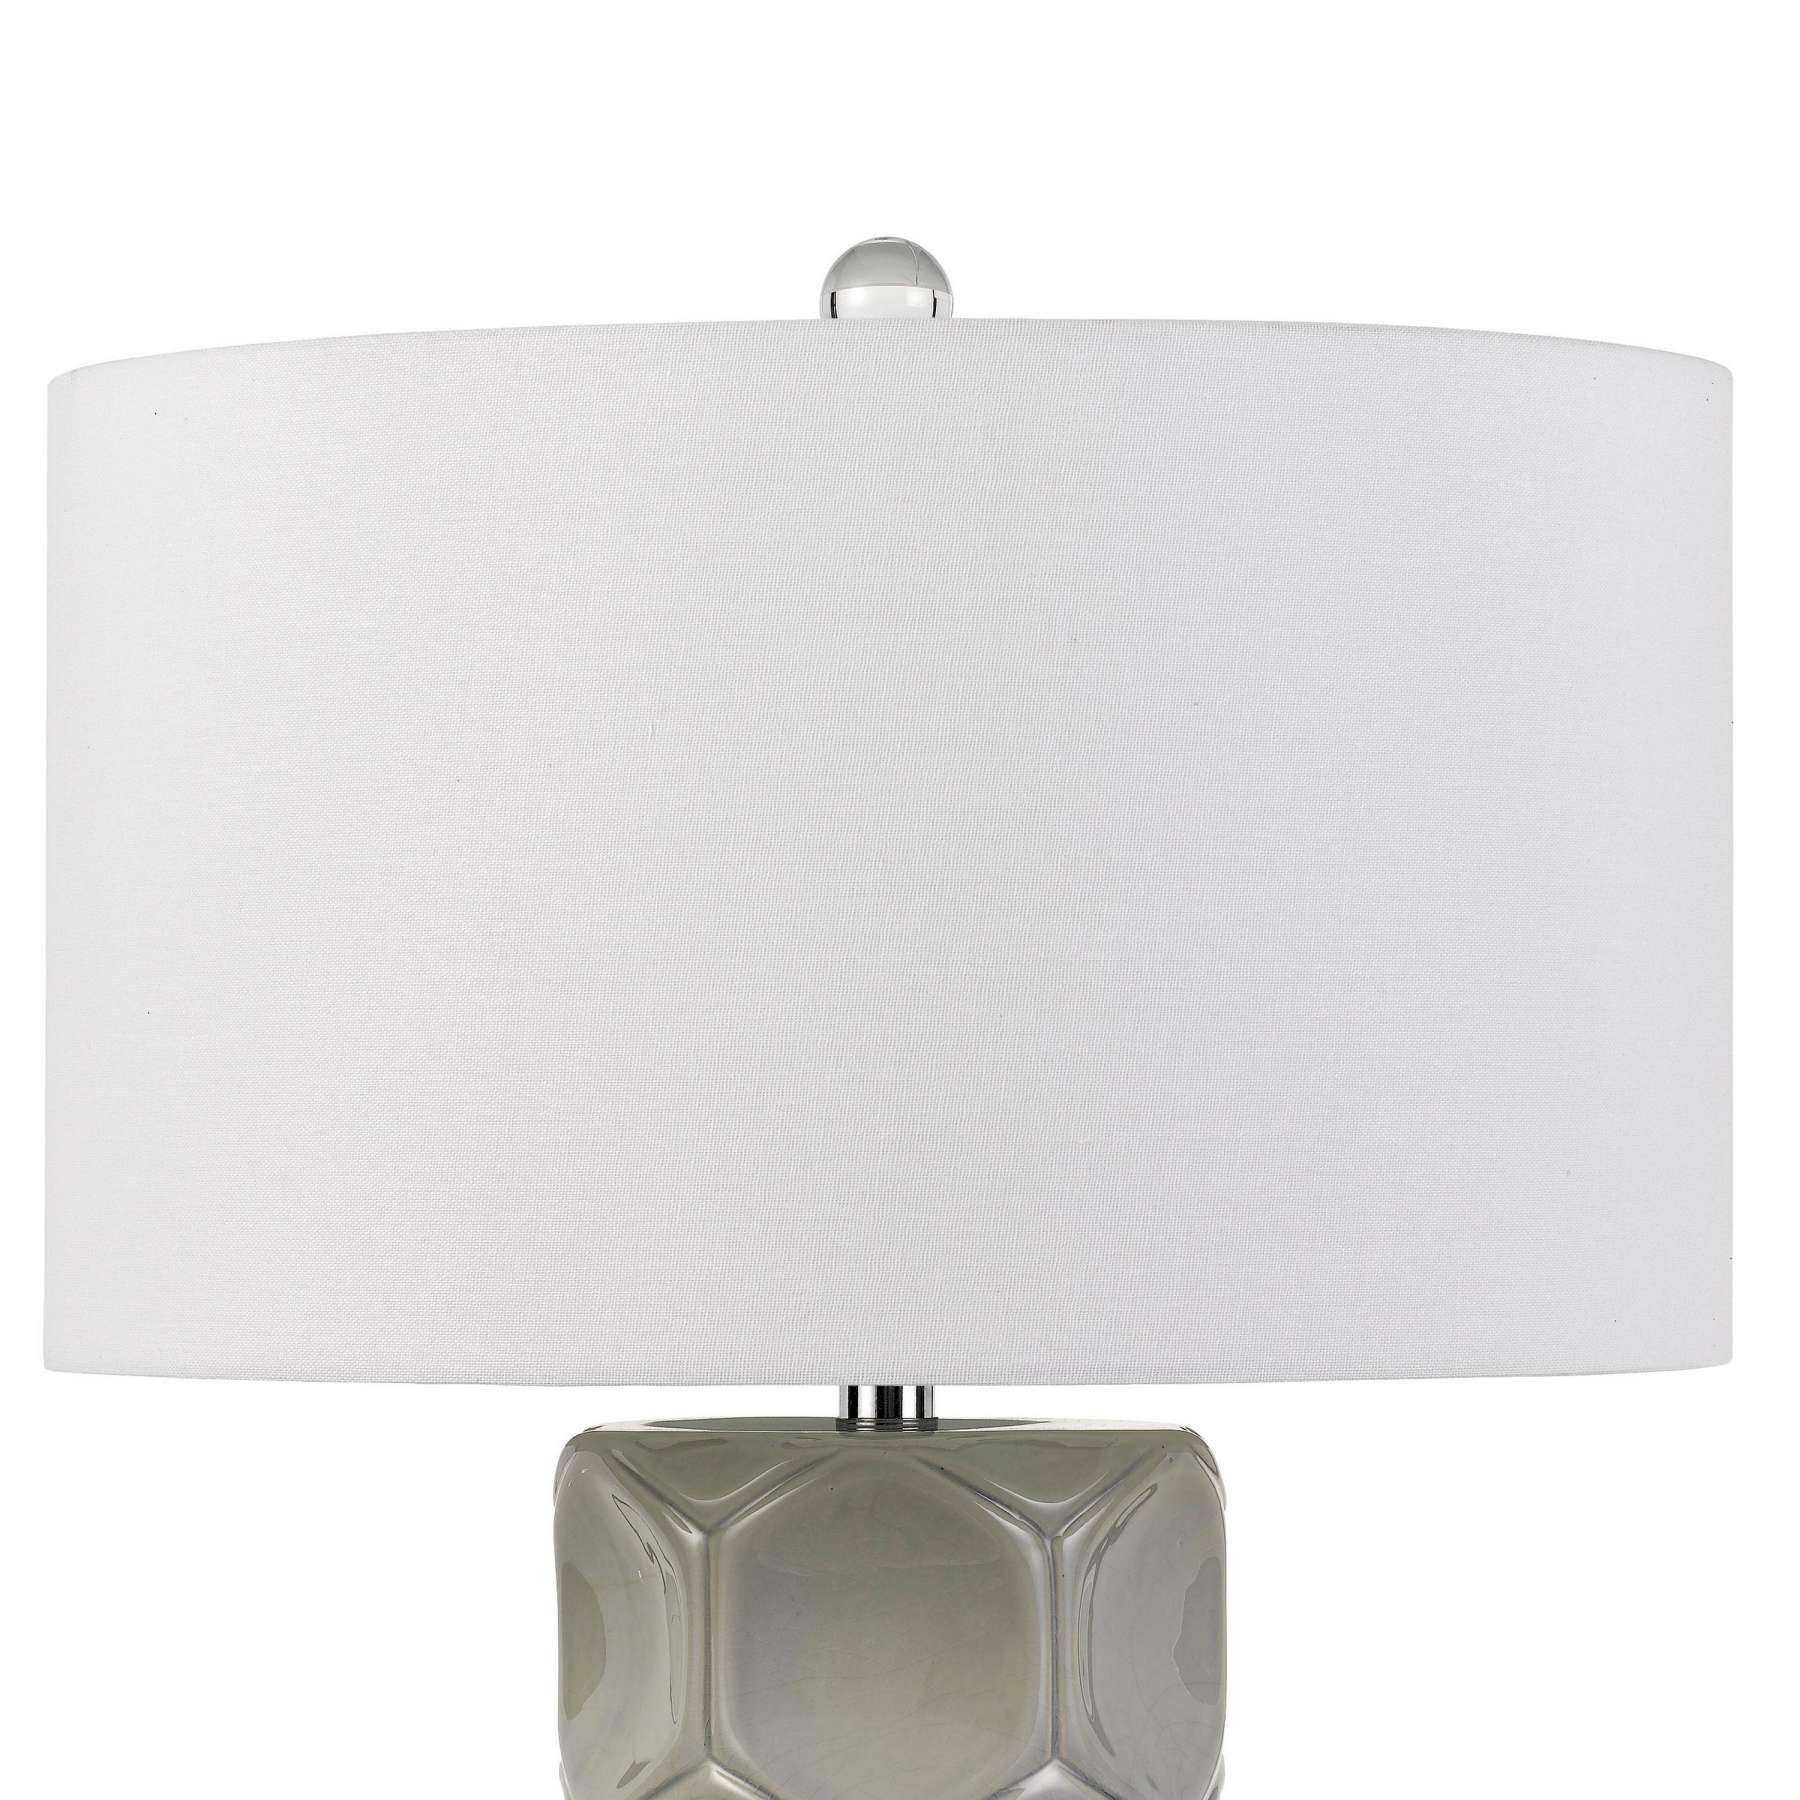 150 Watt Textured Ceramic Frame Table Lamp With Fabric Shade, White And Gray By Benzara